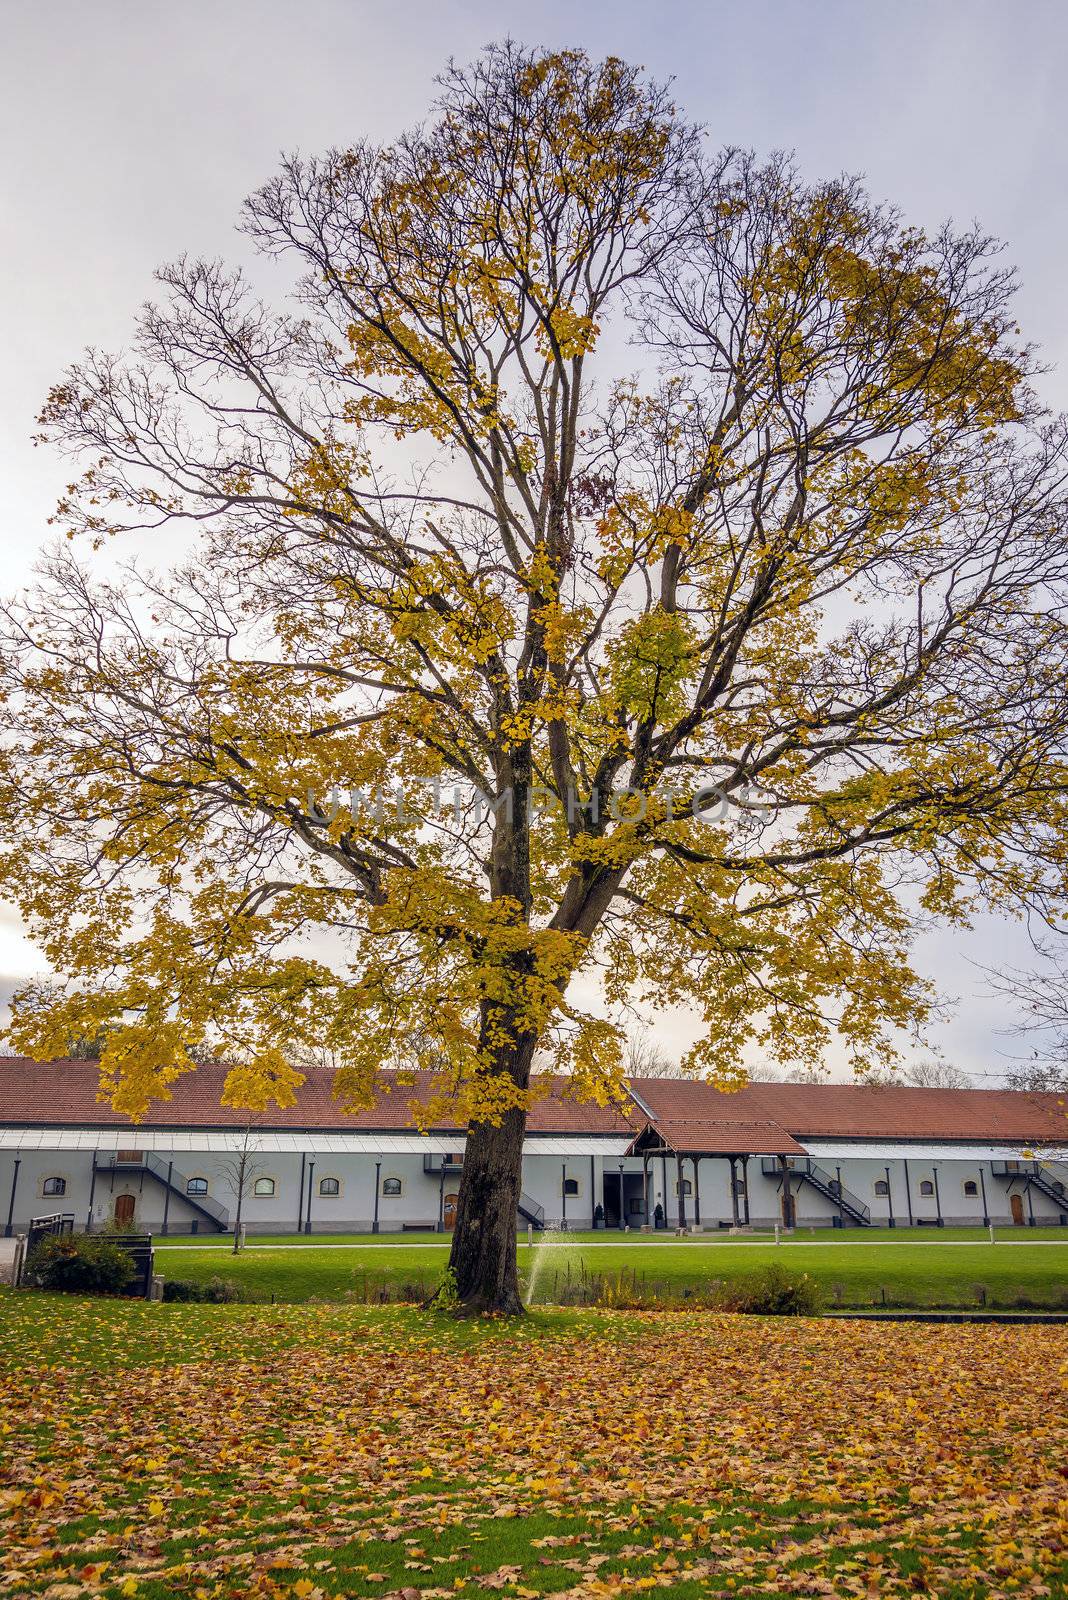 tree in autumn with colored leaves and building in background